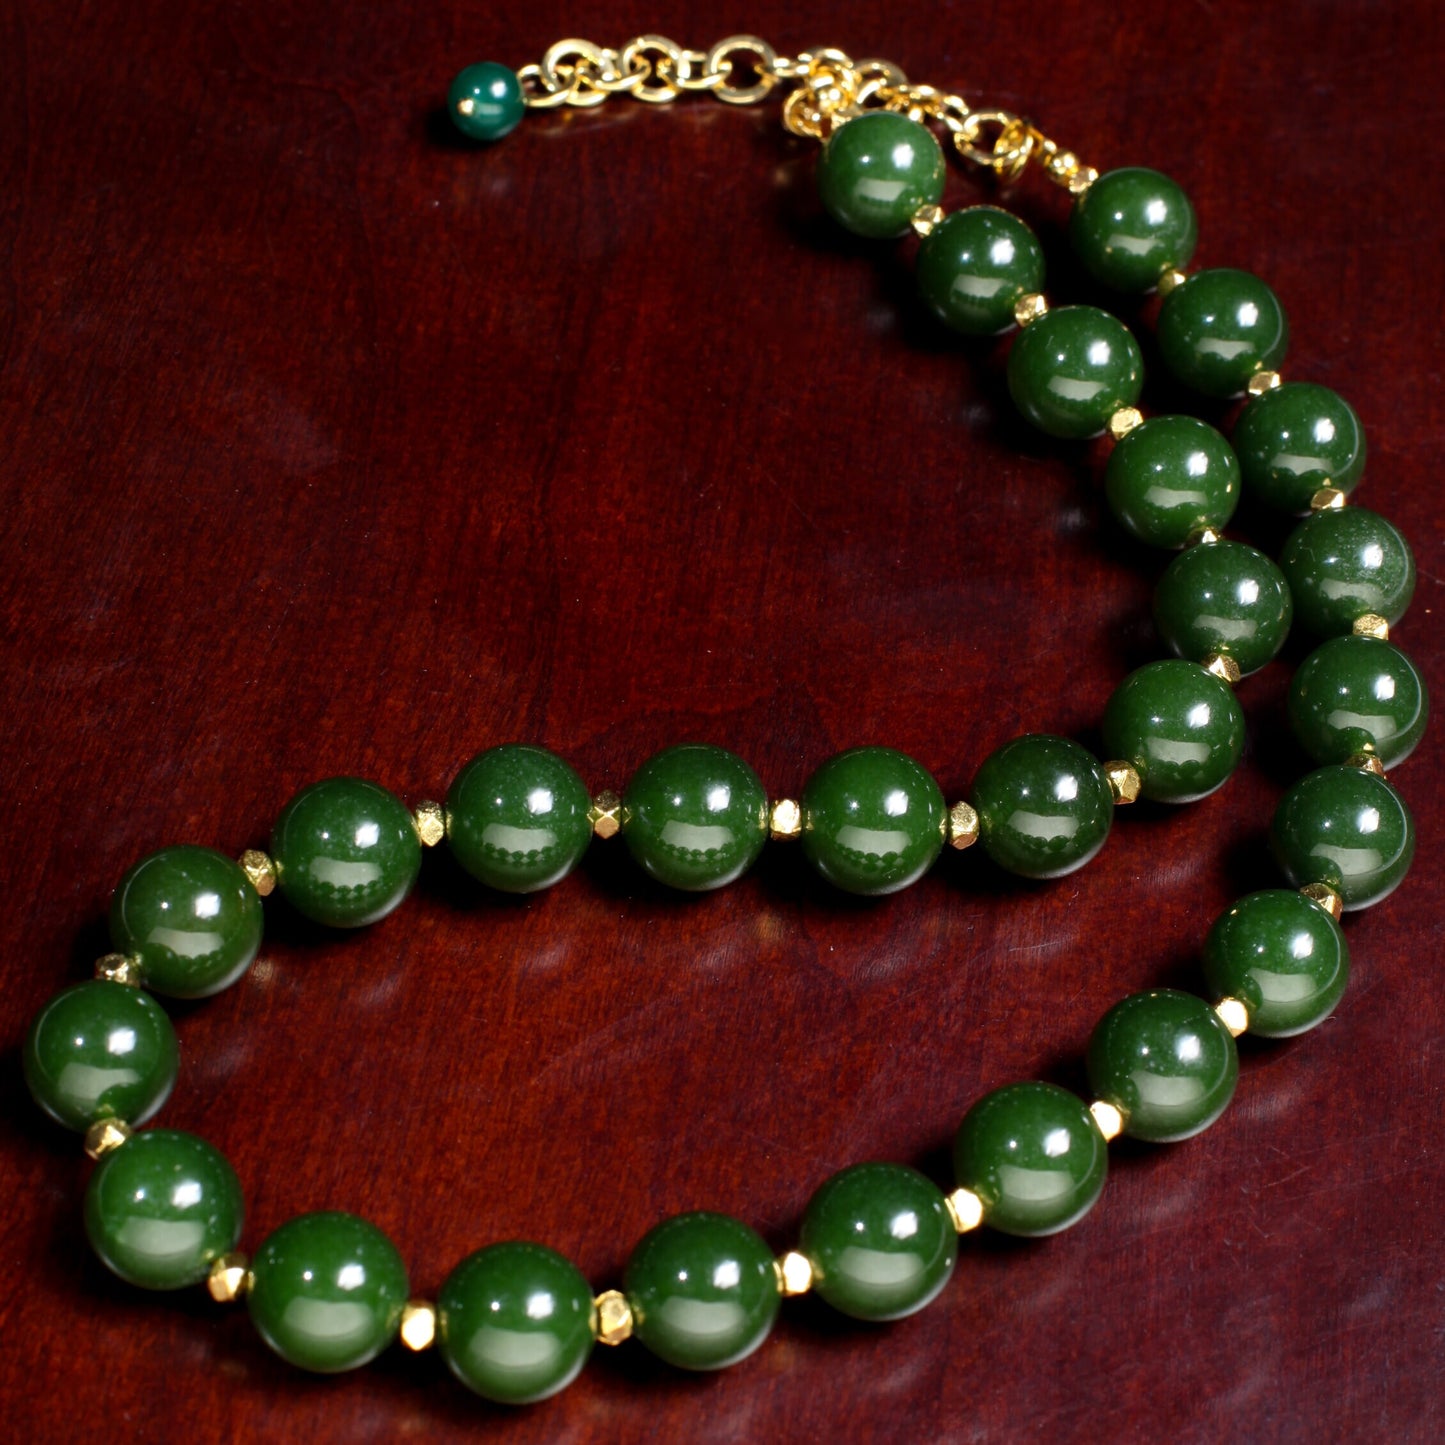 Canadian Nephrite Jade 12mm 18"Gold Necklace with 2" Extension Chain. High Quality Natural Jade smooth polished Bead. Gift for Mom